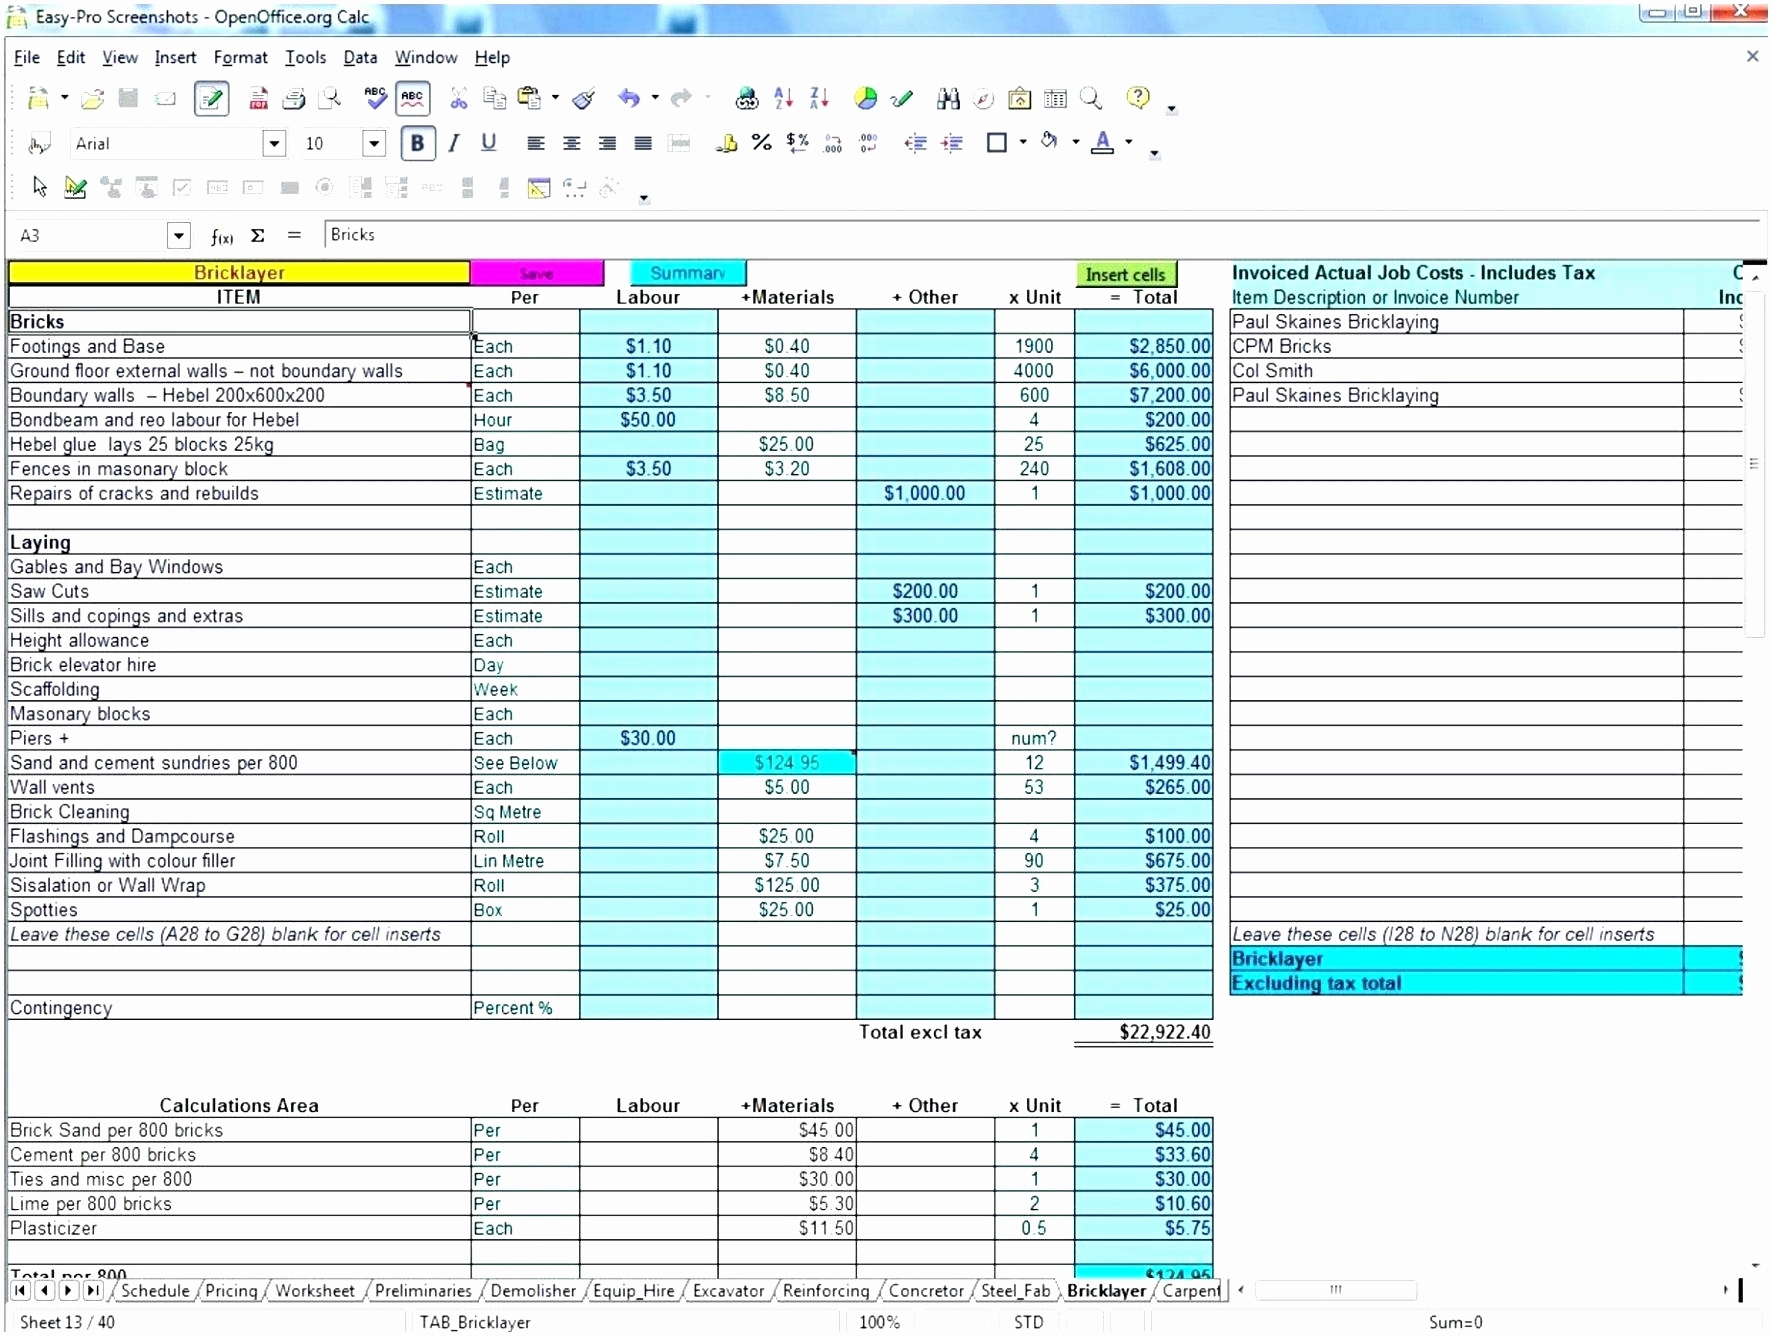 Free Excel Construction Templates Luxury Free Construction Estimate And Construction Estimate Form Excel